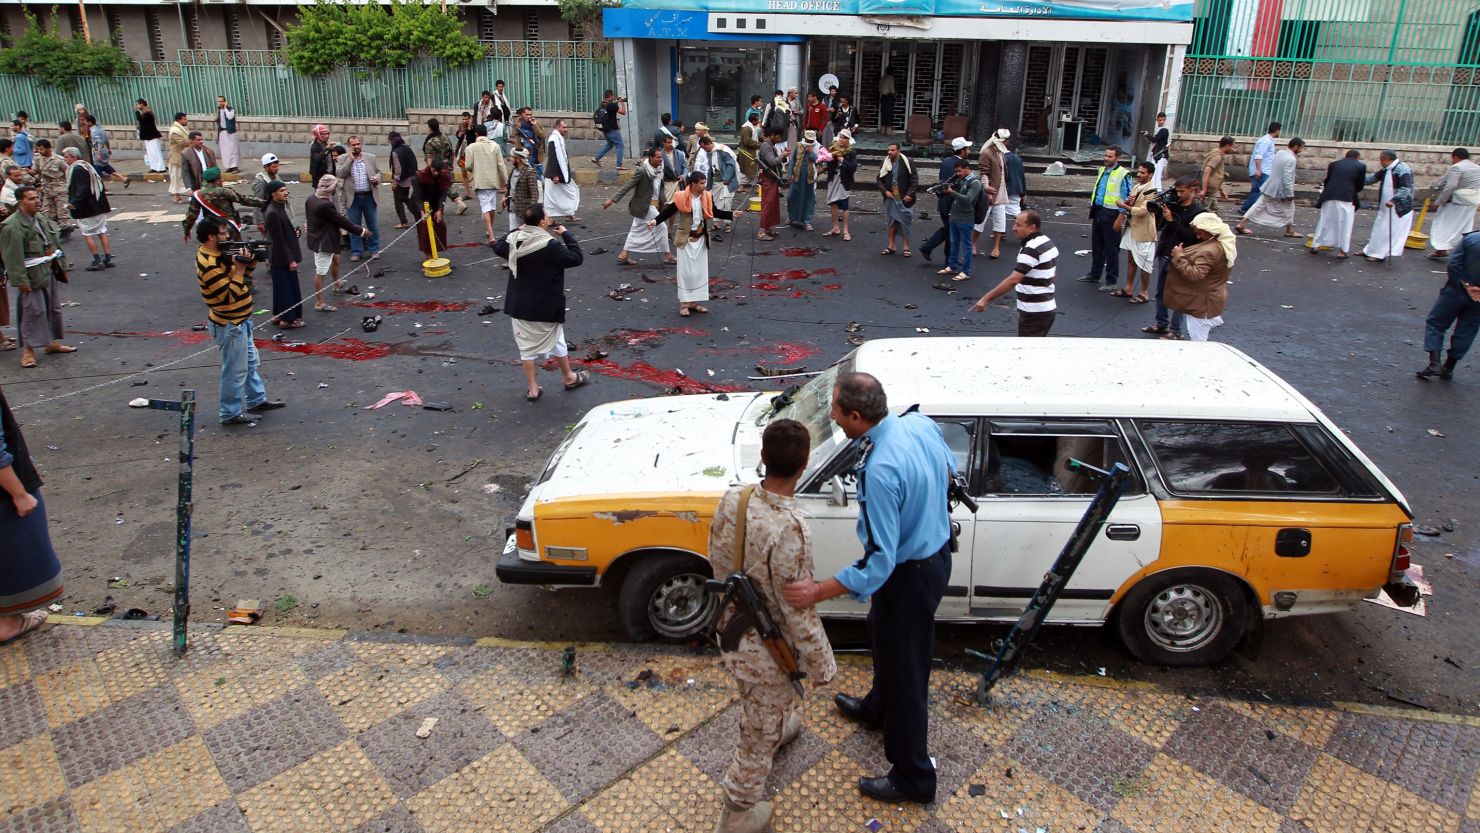  Yemeni security forces and Shiite Huthi militiamen stand next to pools of blood on the ground after a powerful suicide bombing.